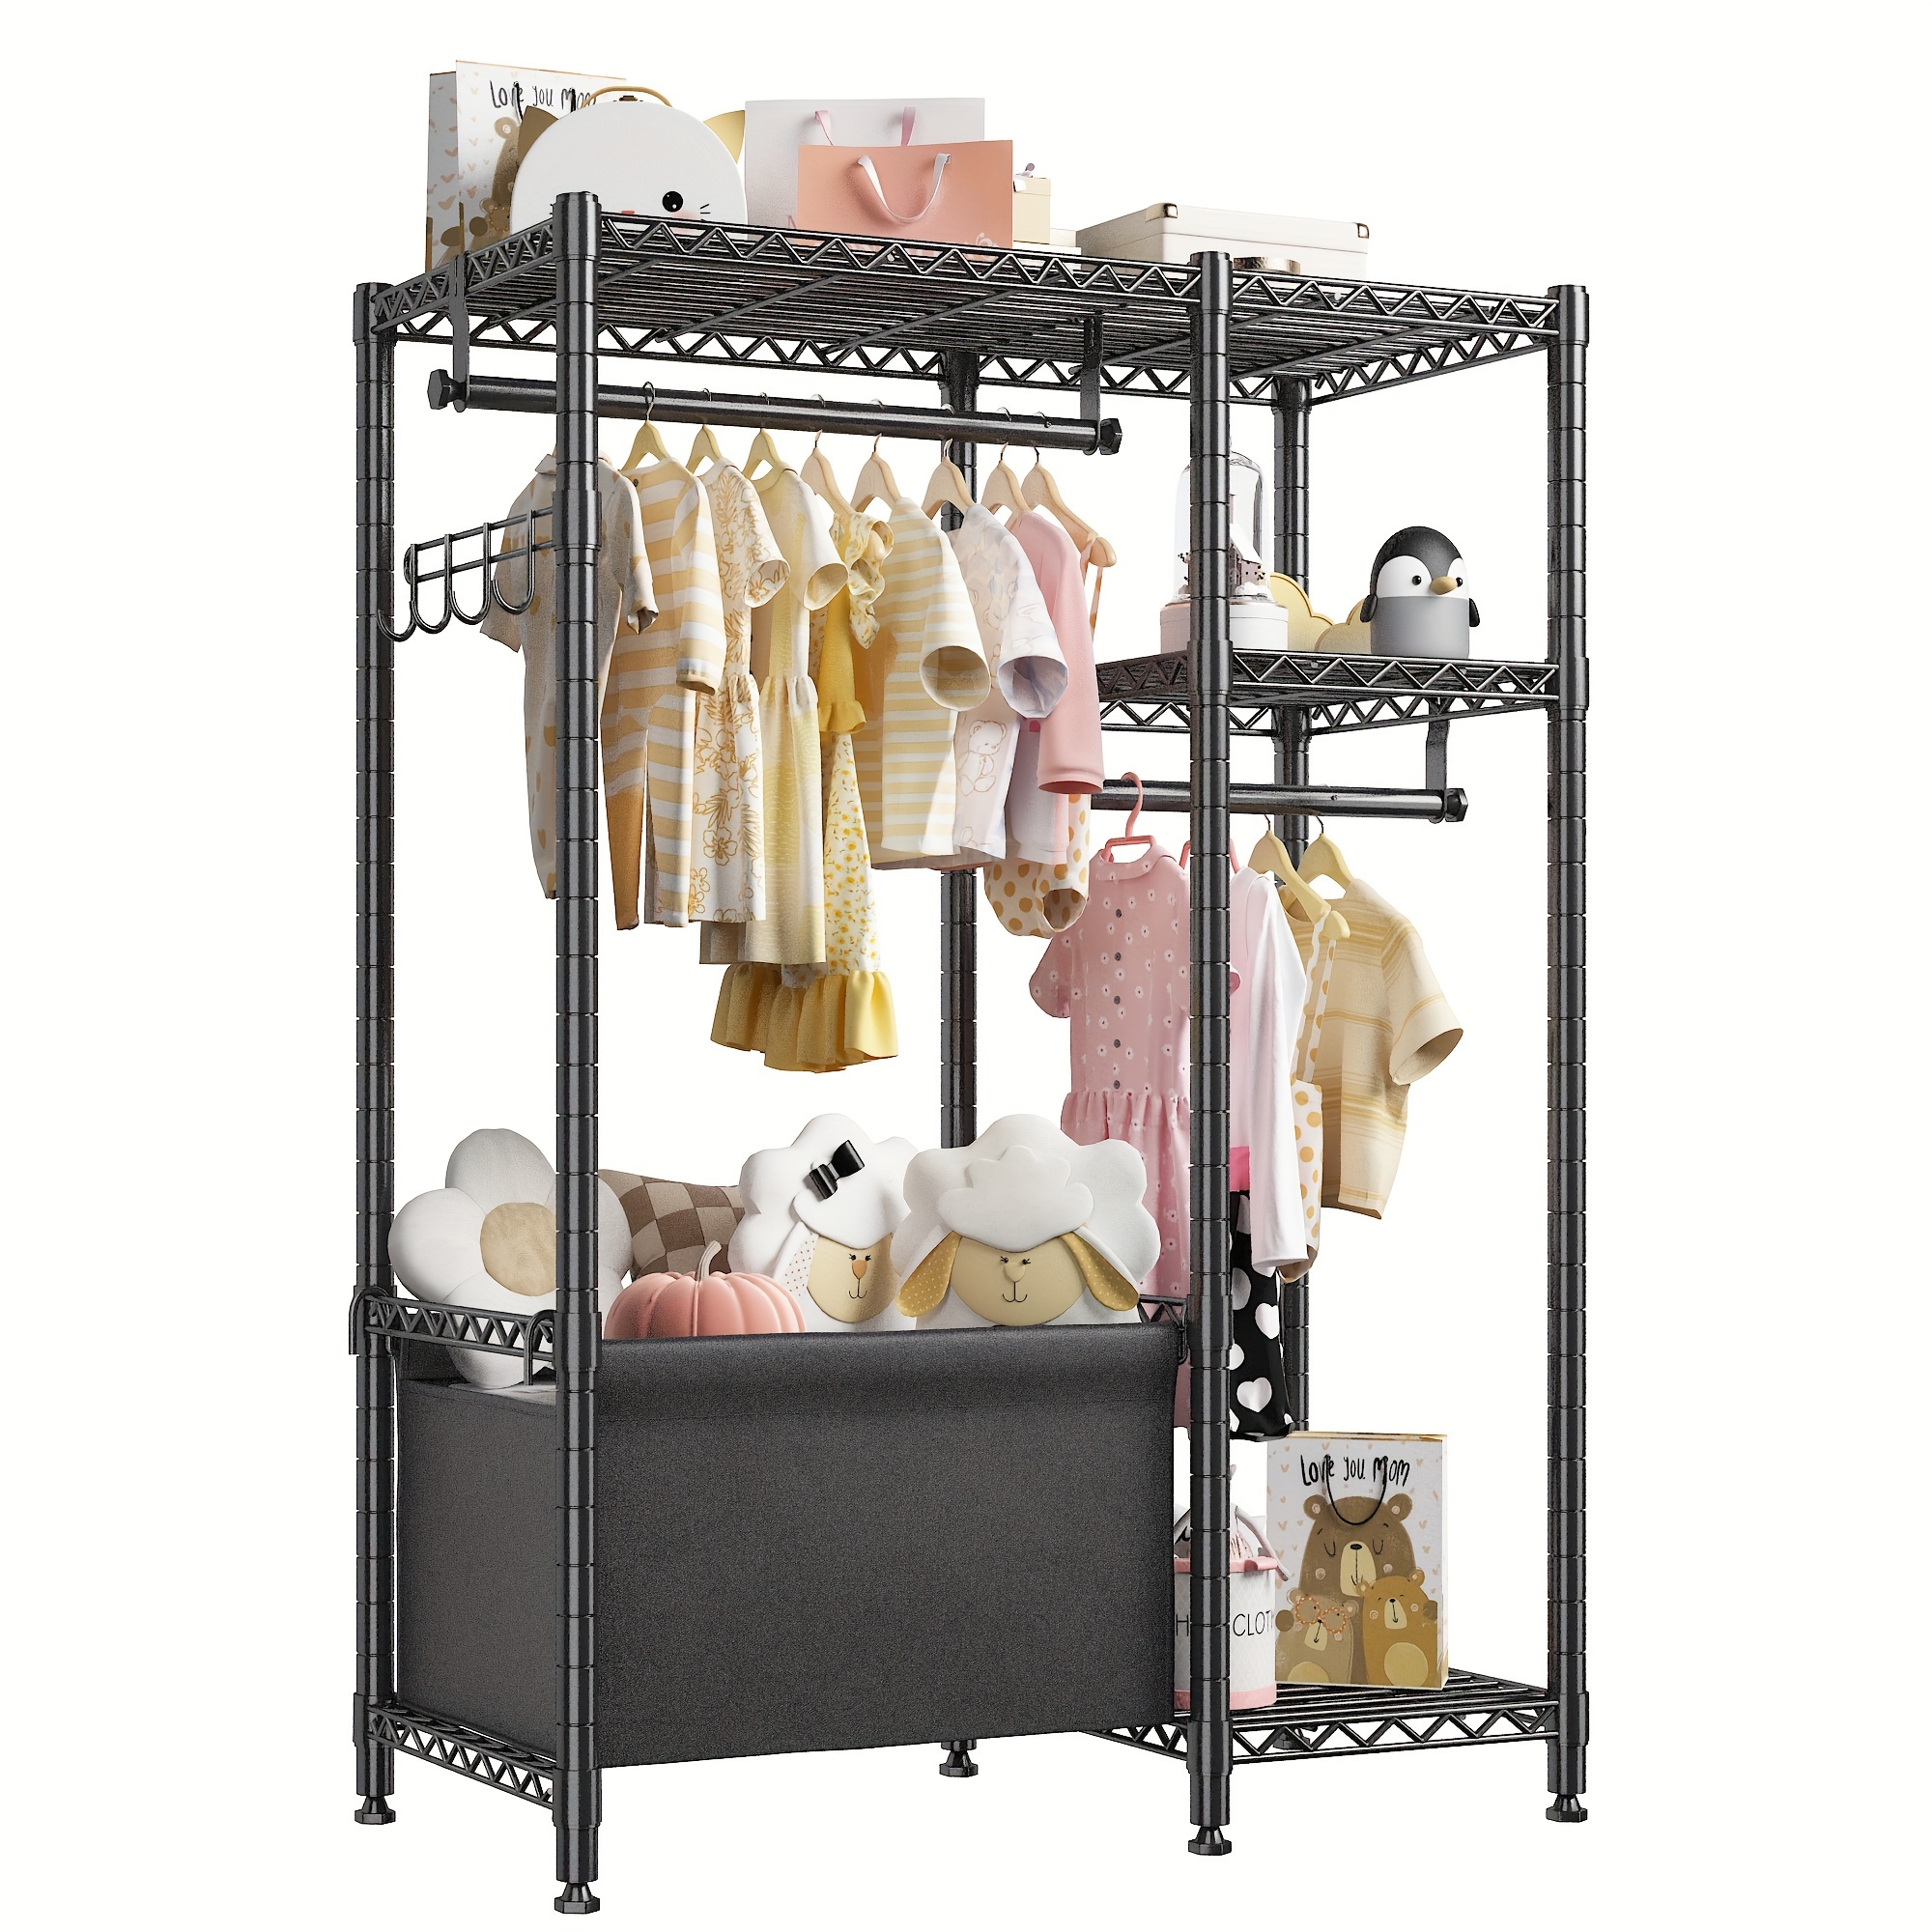 

Small Clothing Racks For Hanging Clothes, Kids Clothes Rack With Storage Basket, Petite Portable Closet Rack With Shelves For Boys And Girls Room, 55.2" H * 37.9" W * 13.5" D, Black